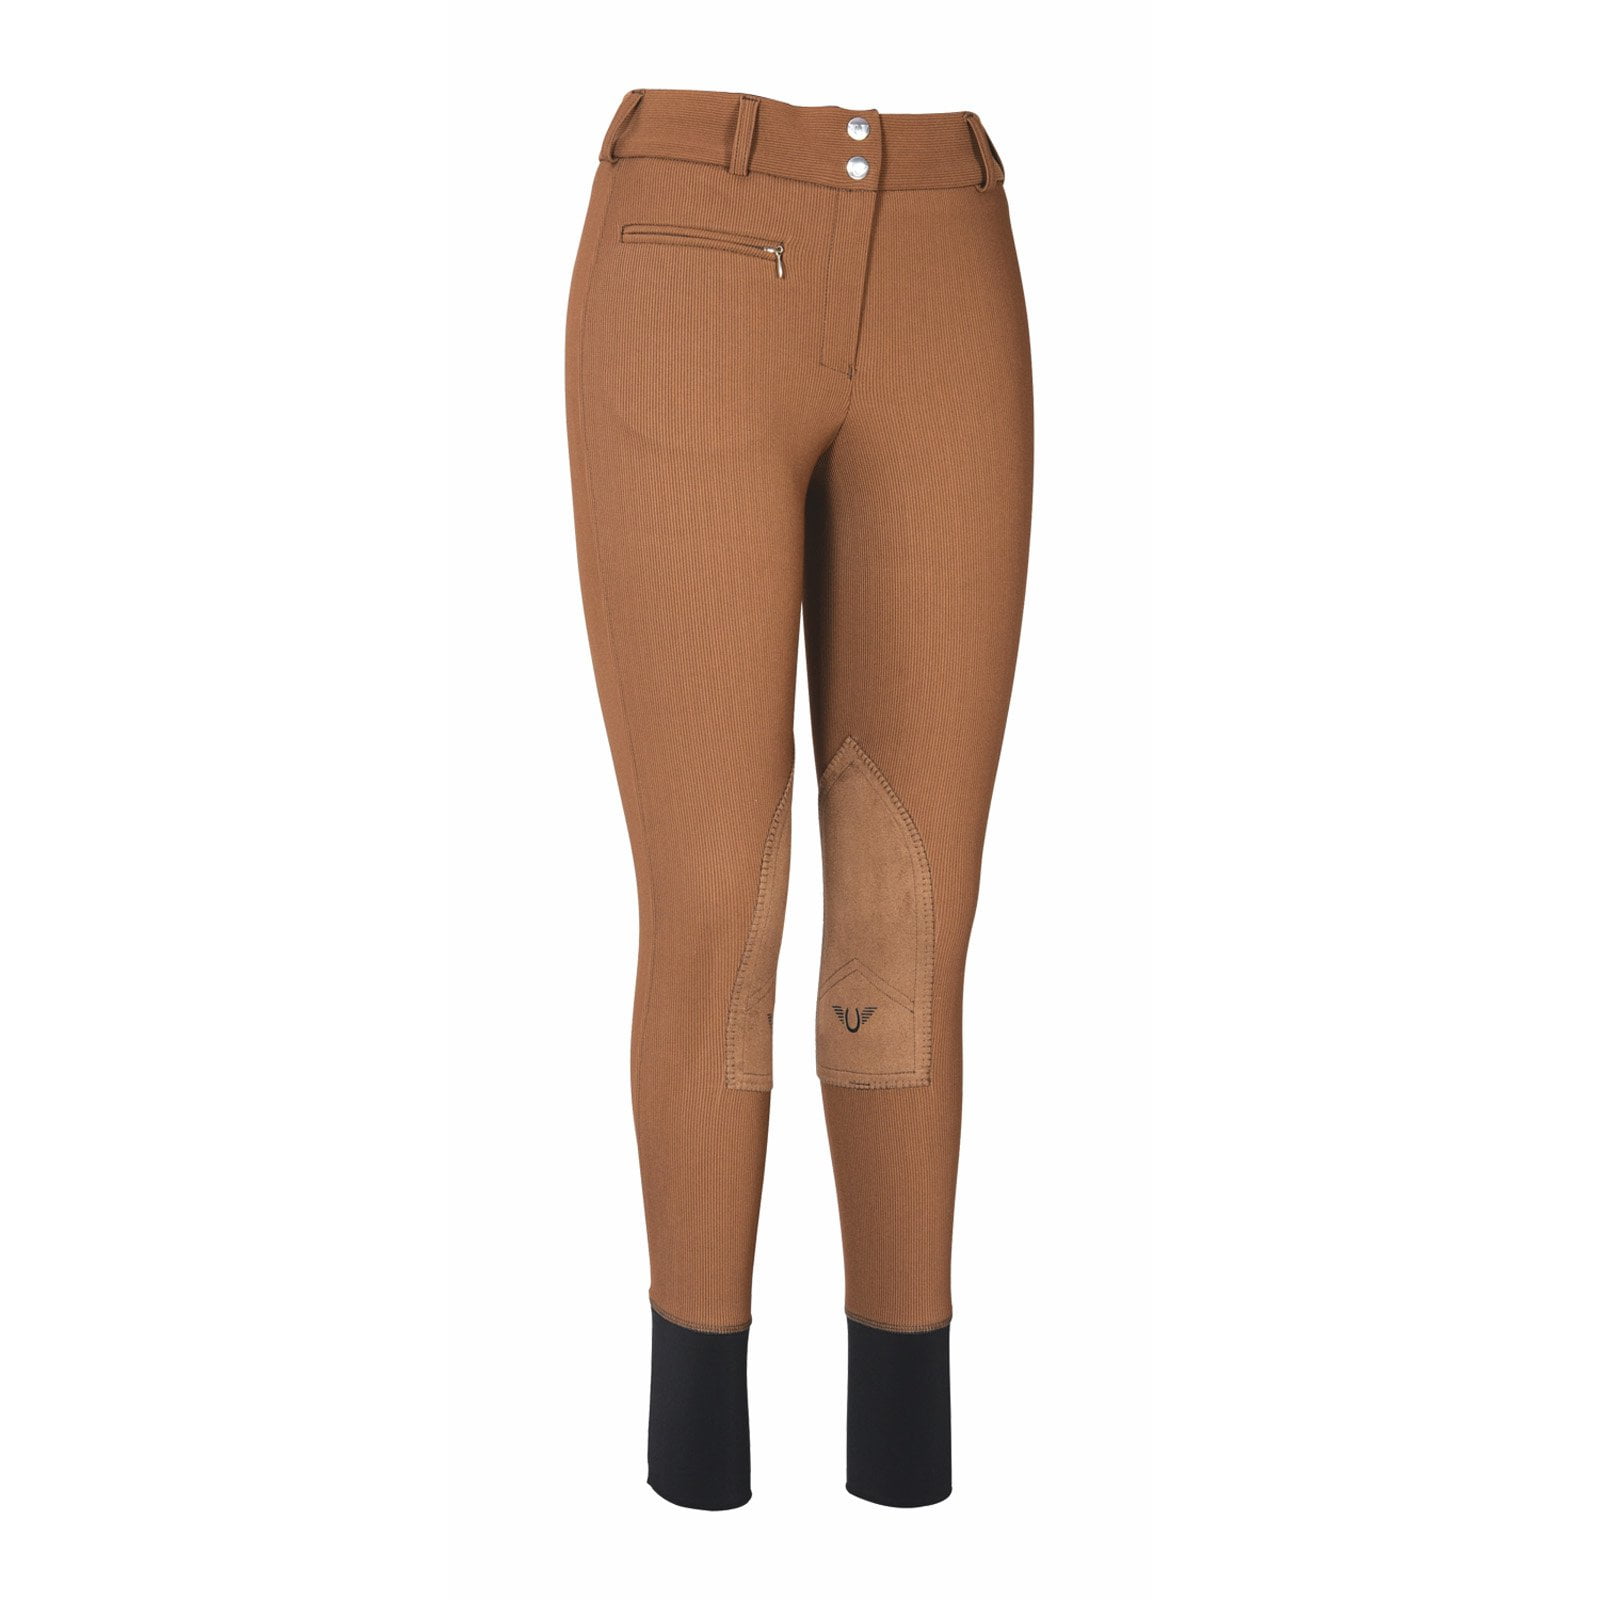 Tuffrider Cotton Lowrise Wide Waistband Knee Patch Riding Breeches 